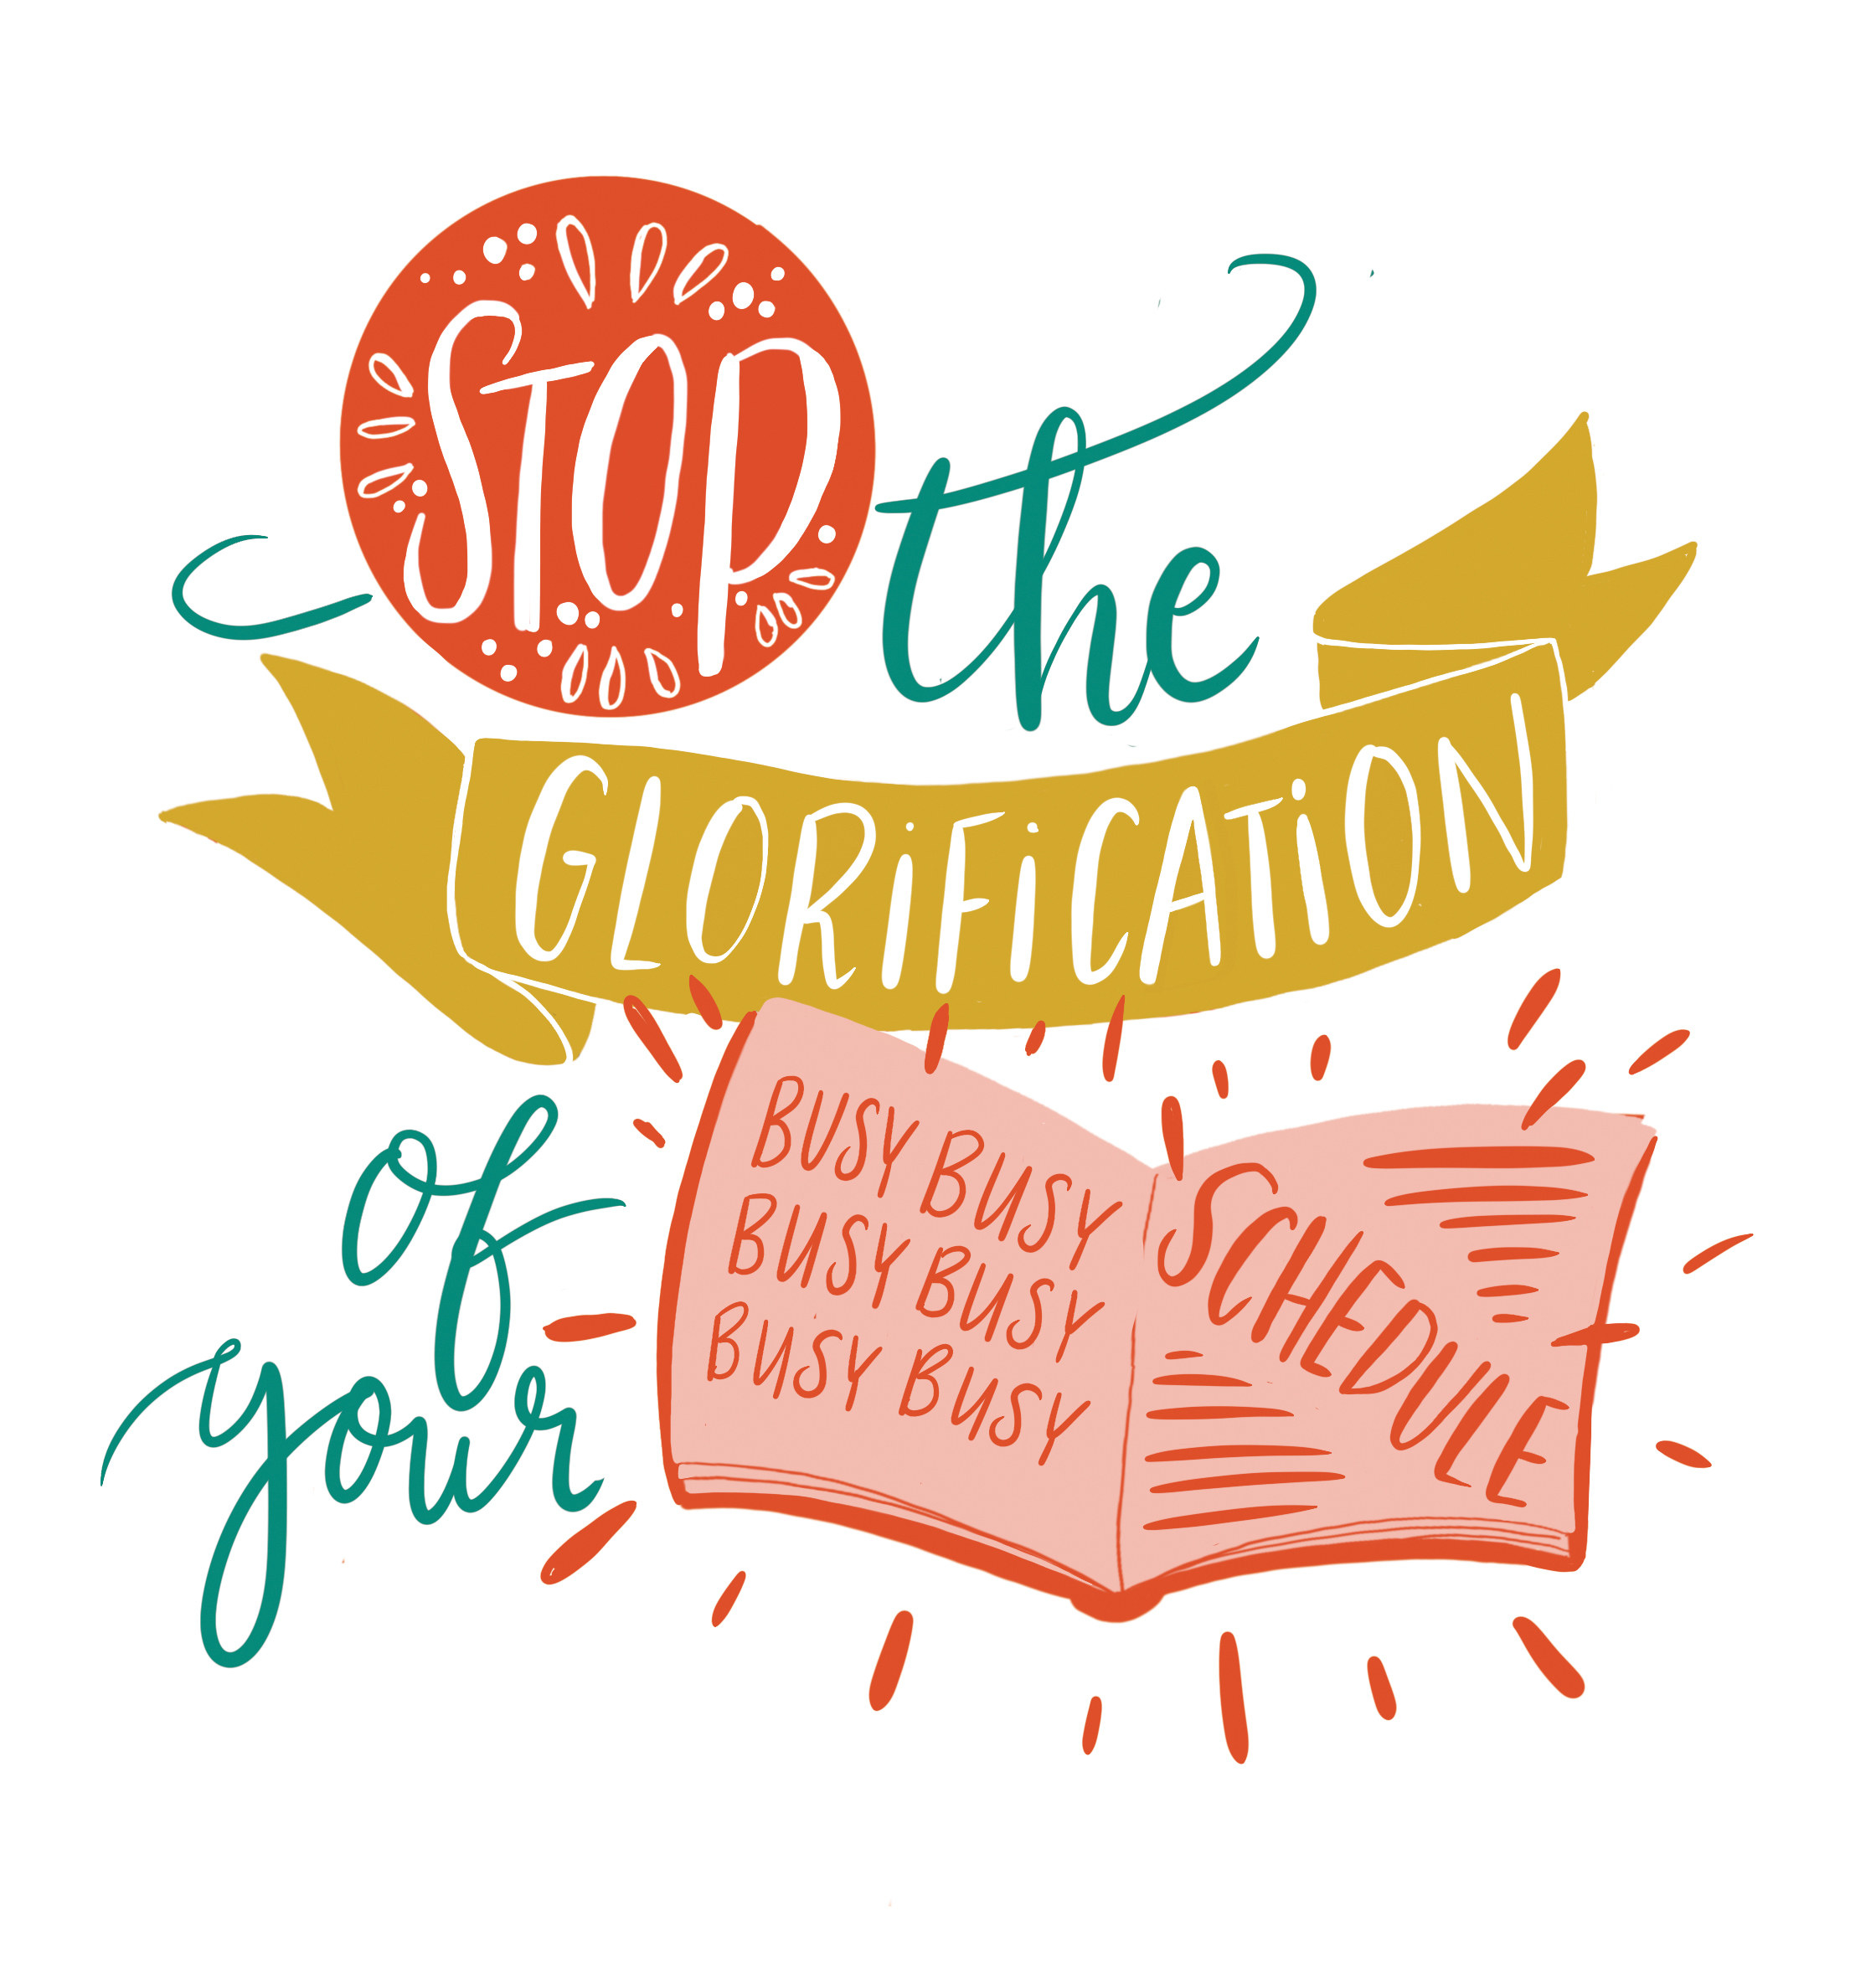 Handdrawn text reading &quot;Stop the glorification of your busy busy busy busy busy busy schedule&quot; illustrated on an open book. 